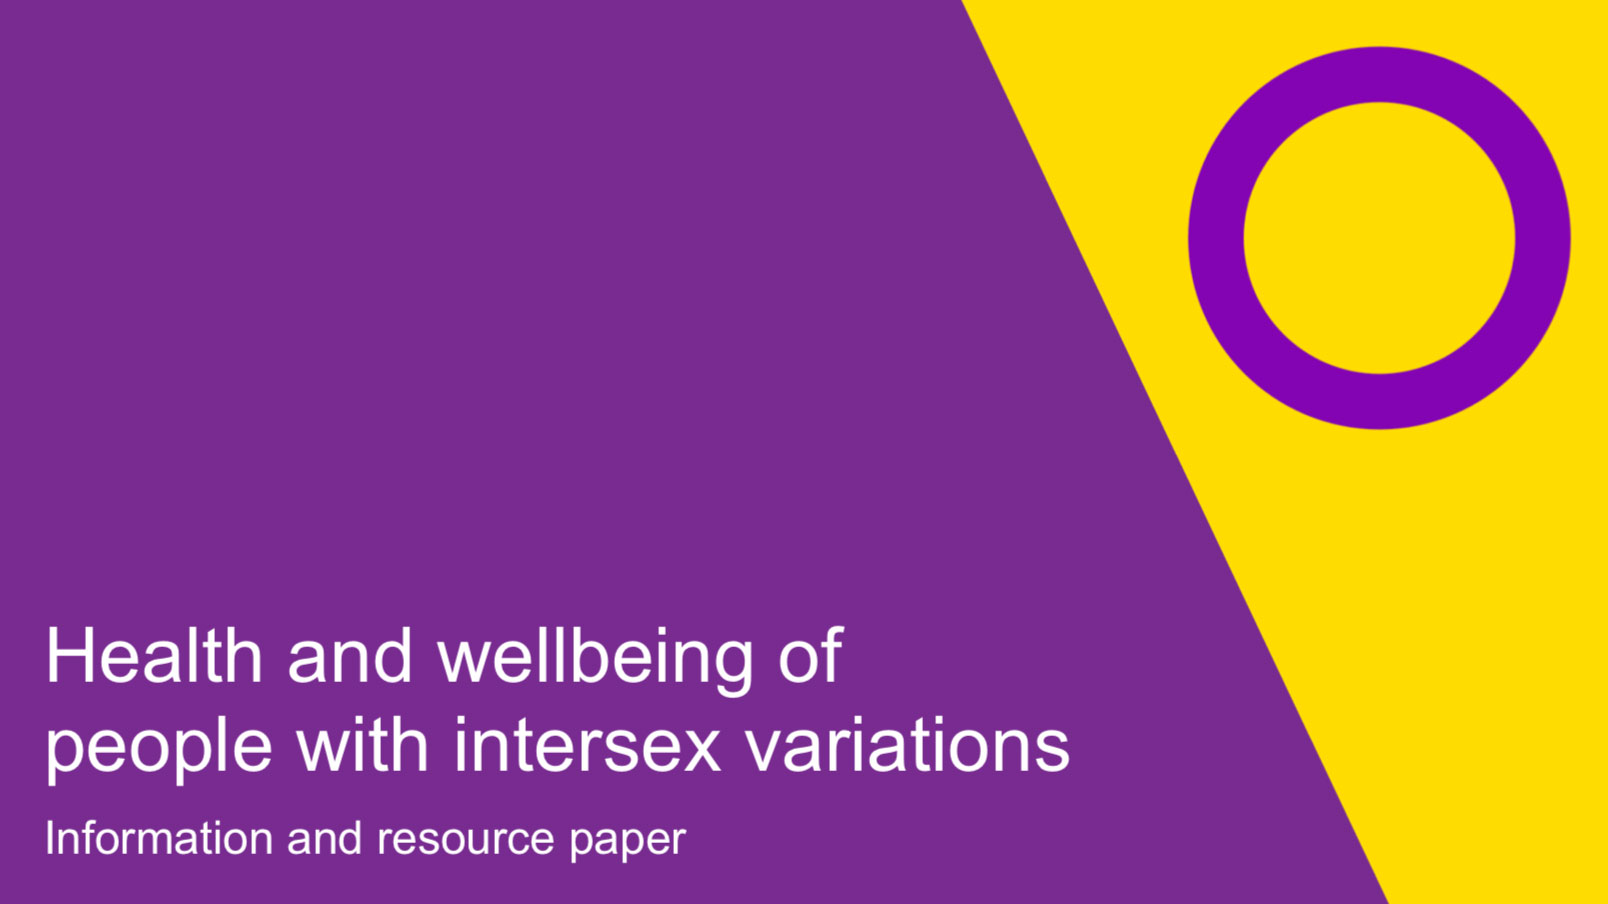 Response To The Victorian Paper On The Health And Wellbeing Of People With Intersex Variations 8277